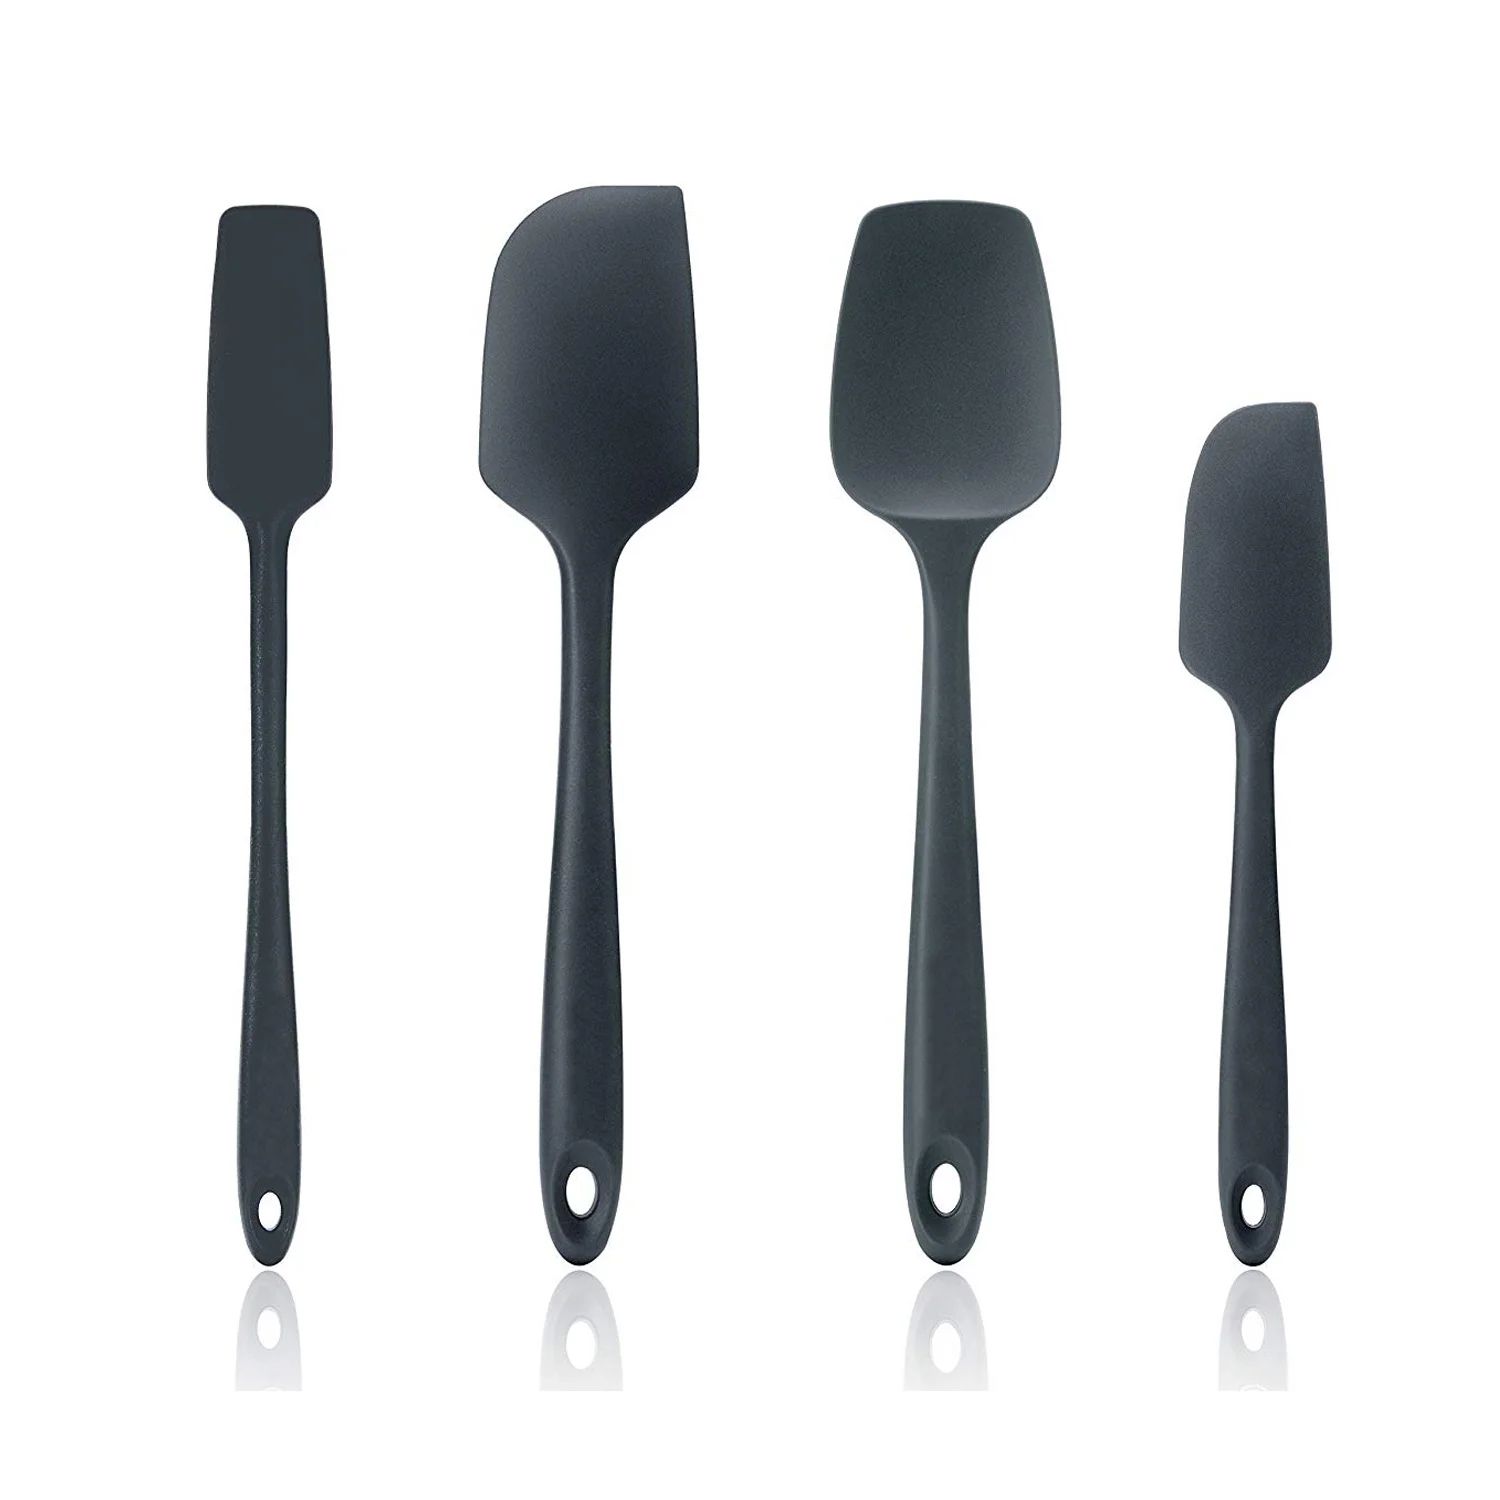 600ºF High Heat-Resistant Silicone Spatula Set, Seamless Design Non-Stick Rubber with Cooking/Ba... | Walmart (US)